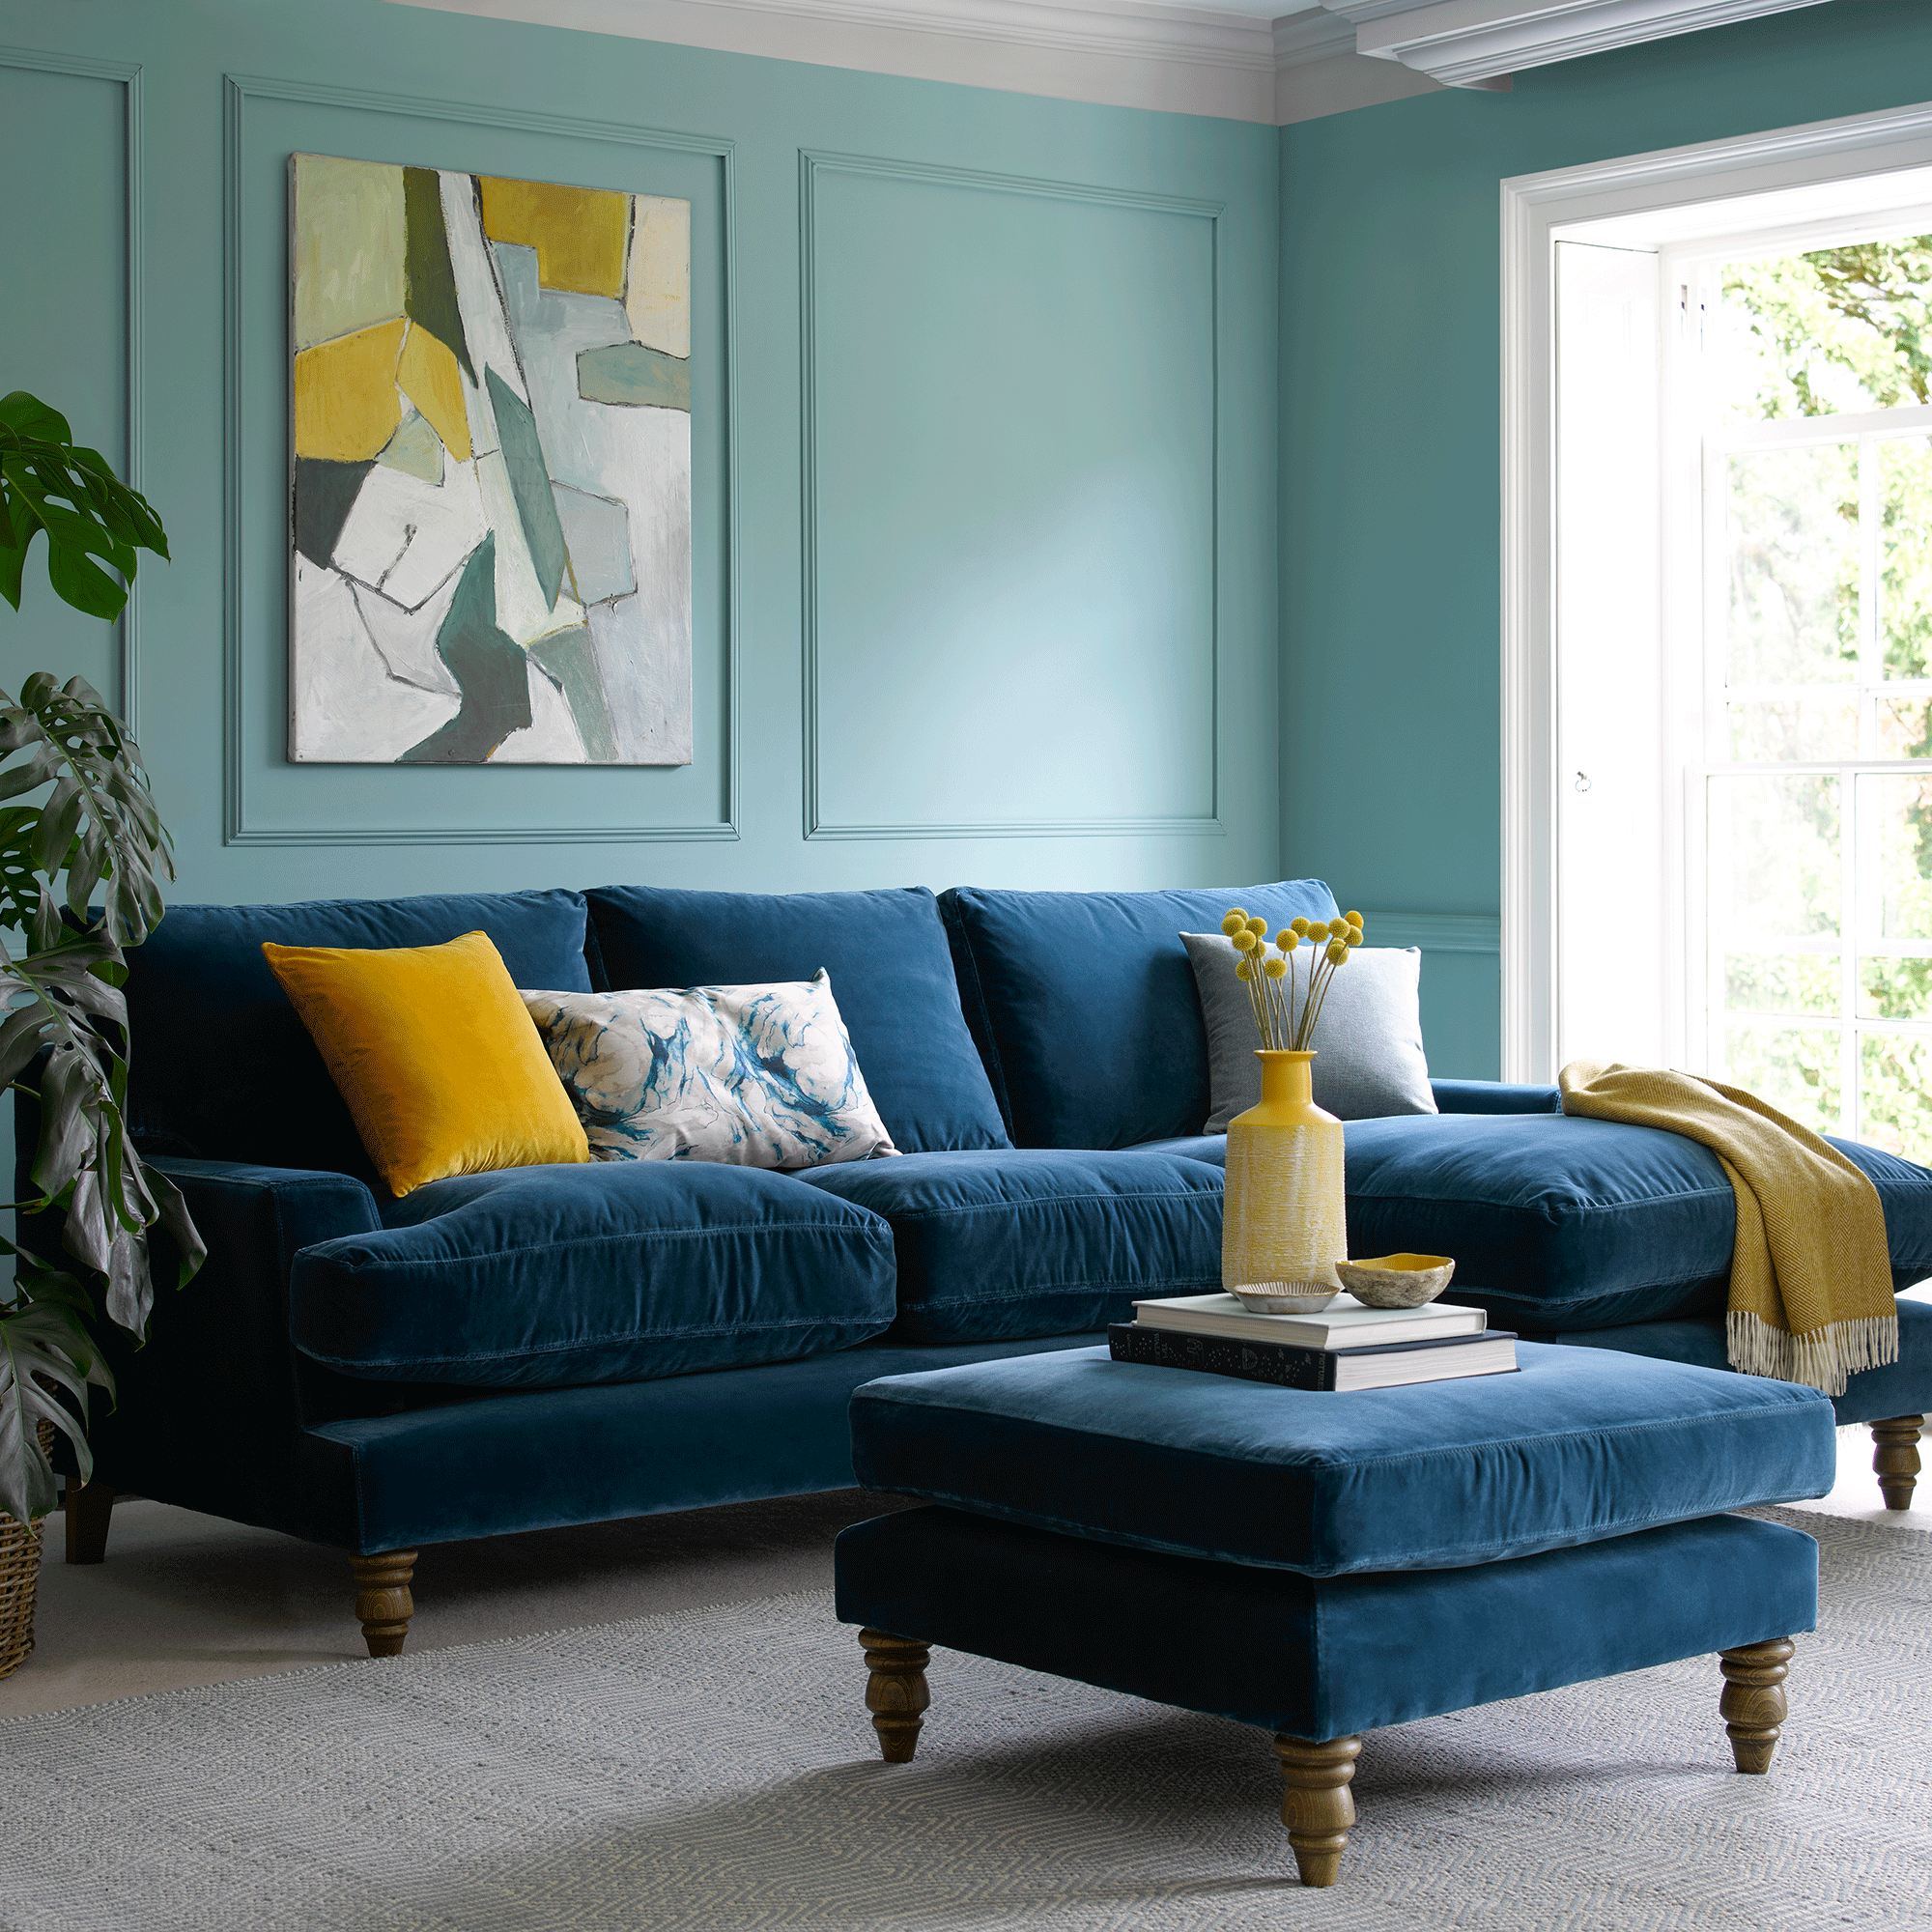 Blue sofa in blue room with large artwork